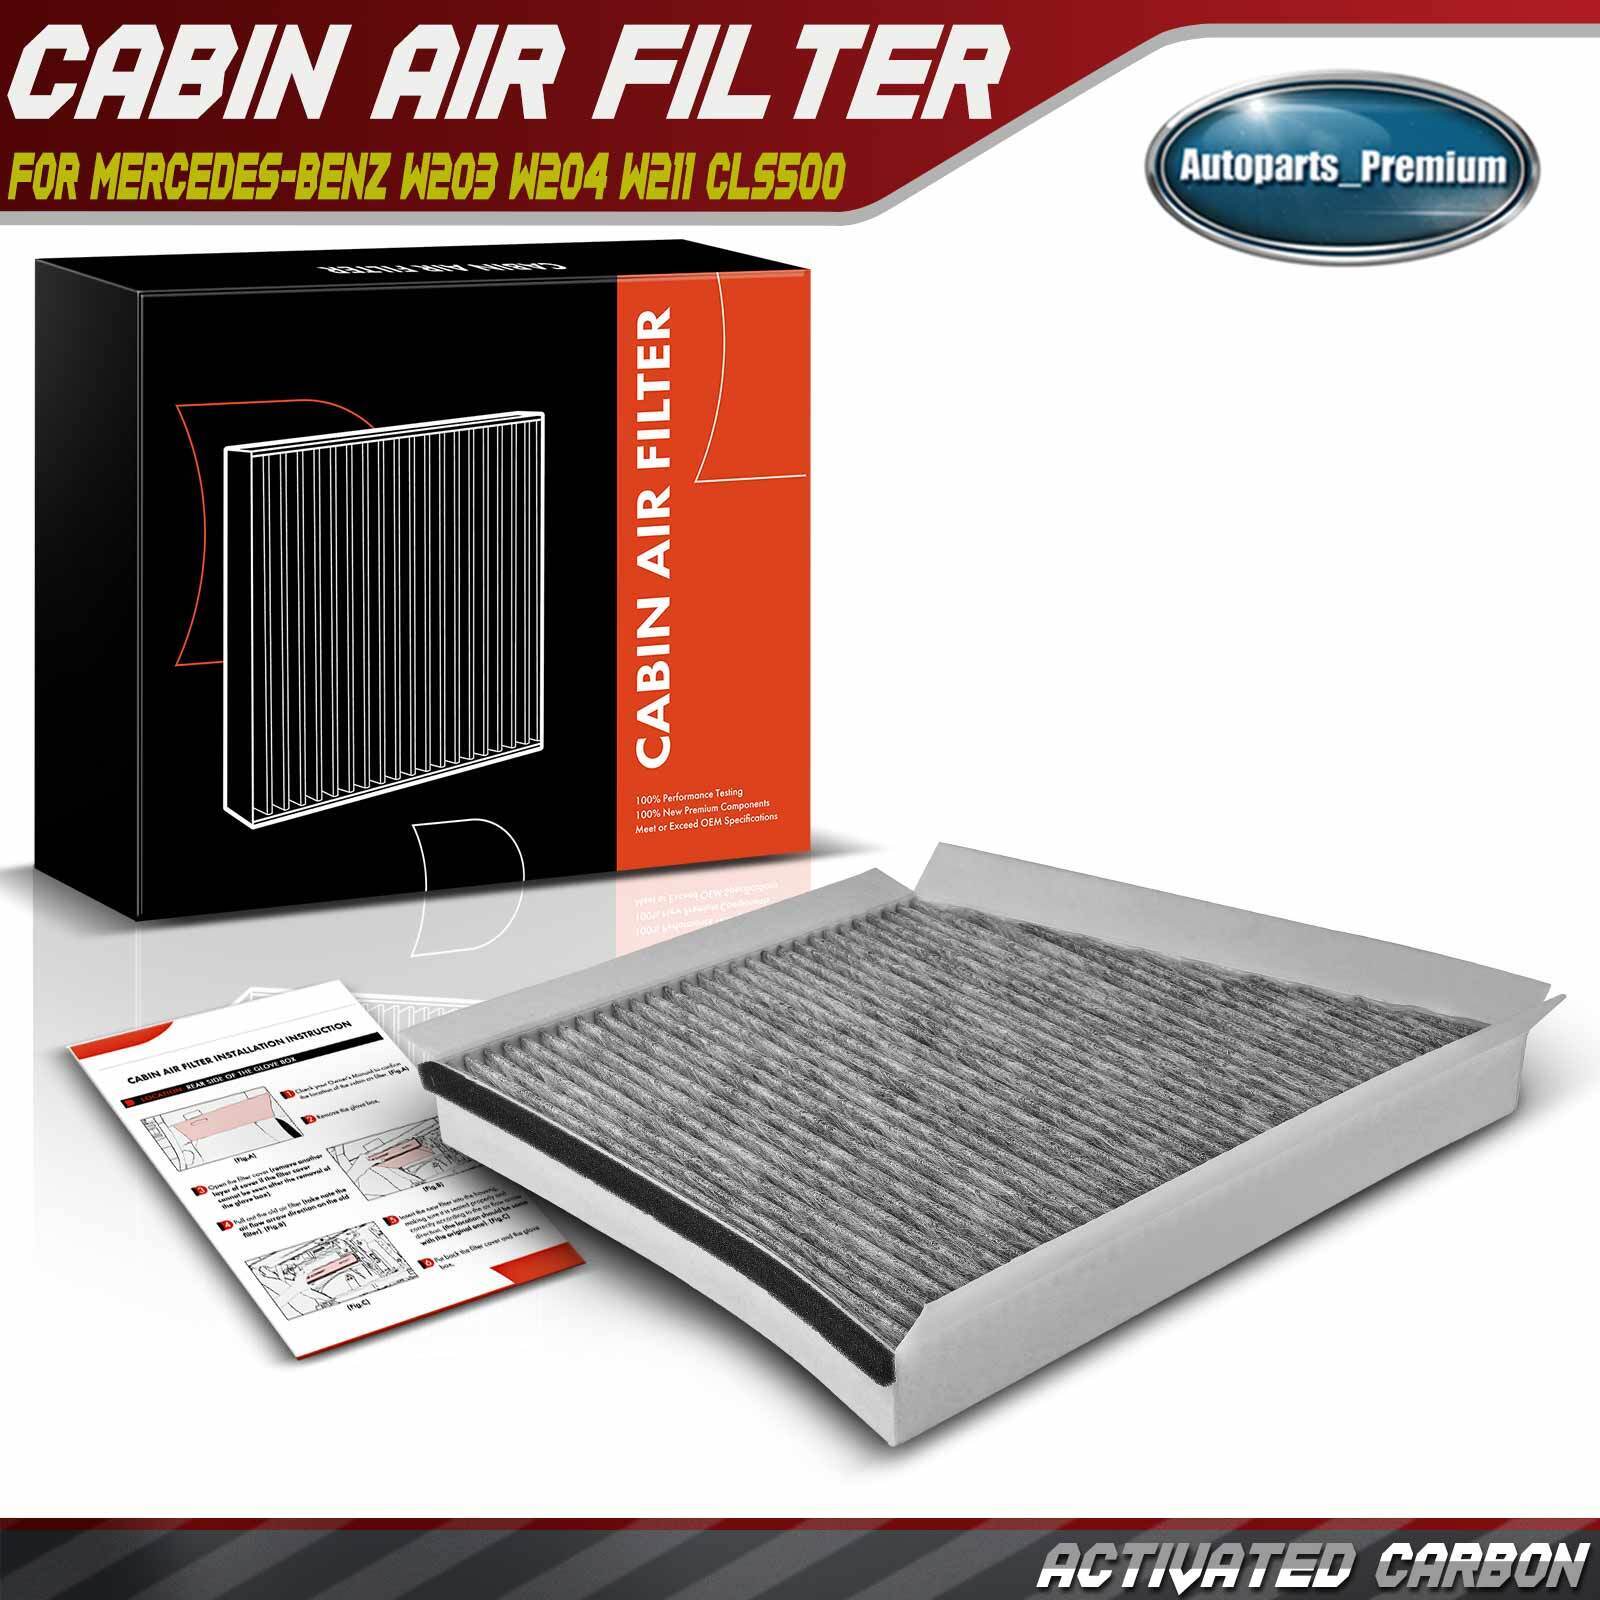 Activated Carbon Cabin Air Filter for Mercedes-Benz W203 W204 W211 CLS500 E320